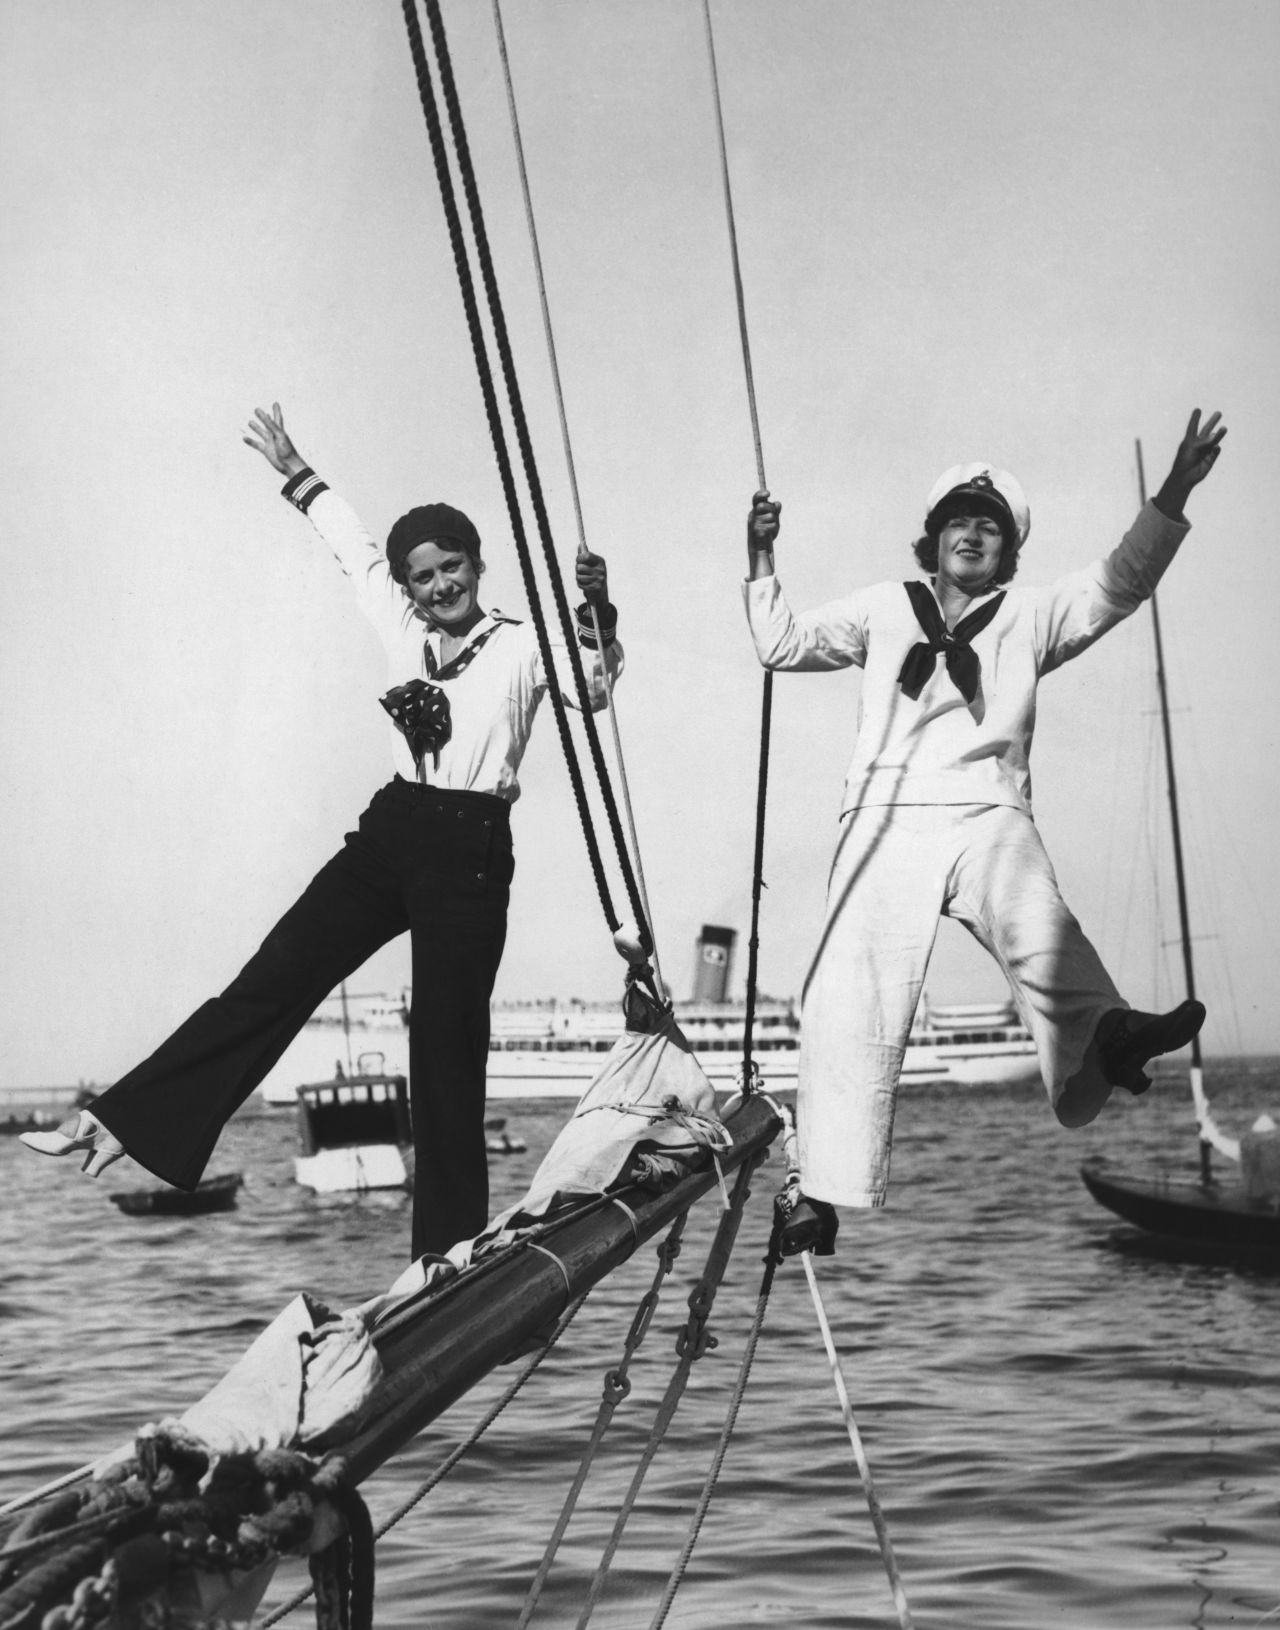 "The sailor suit becomes this really playful item -- the collar especially. And that's why it's so enduring," said Butchart.<br />"It has links to innocence of childhood."<br />There is certainly a playful spirit to these two women, posing on the bow of a boat in 1925.